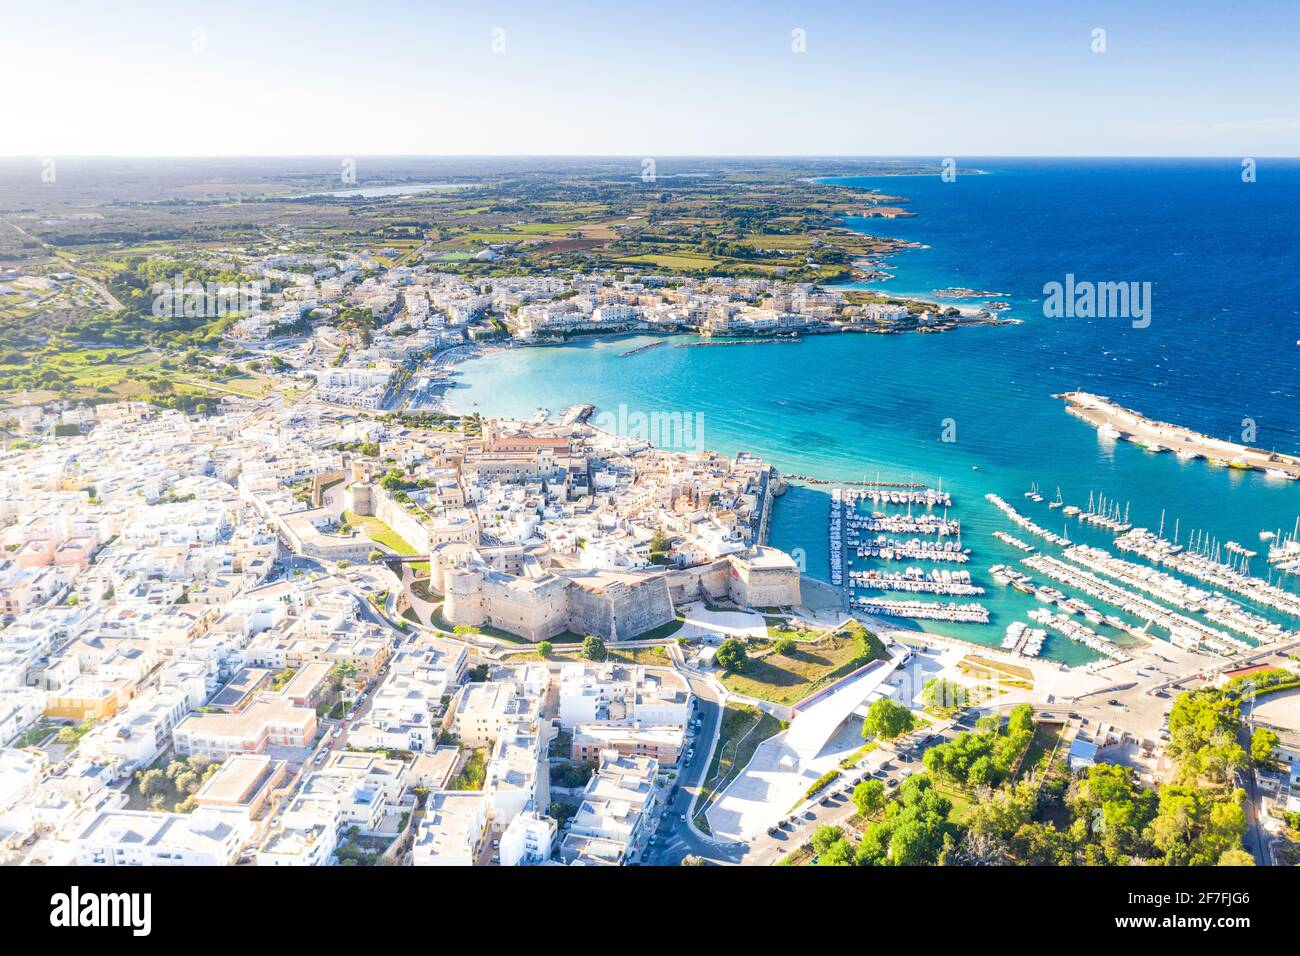 Aerial view of the coastal town of Otranto washed by the turquoise sea, Salento, Lecce province, Apulia, Italy, Europe Stock Photo